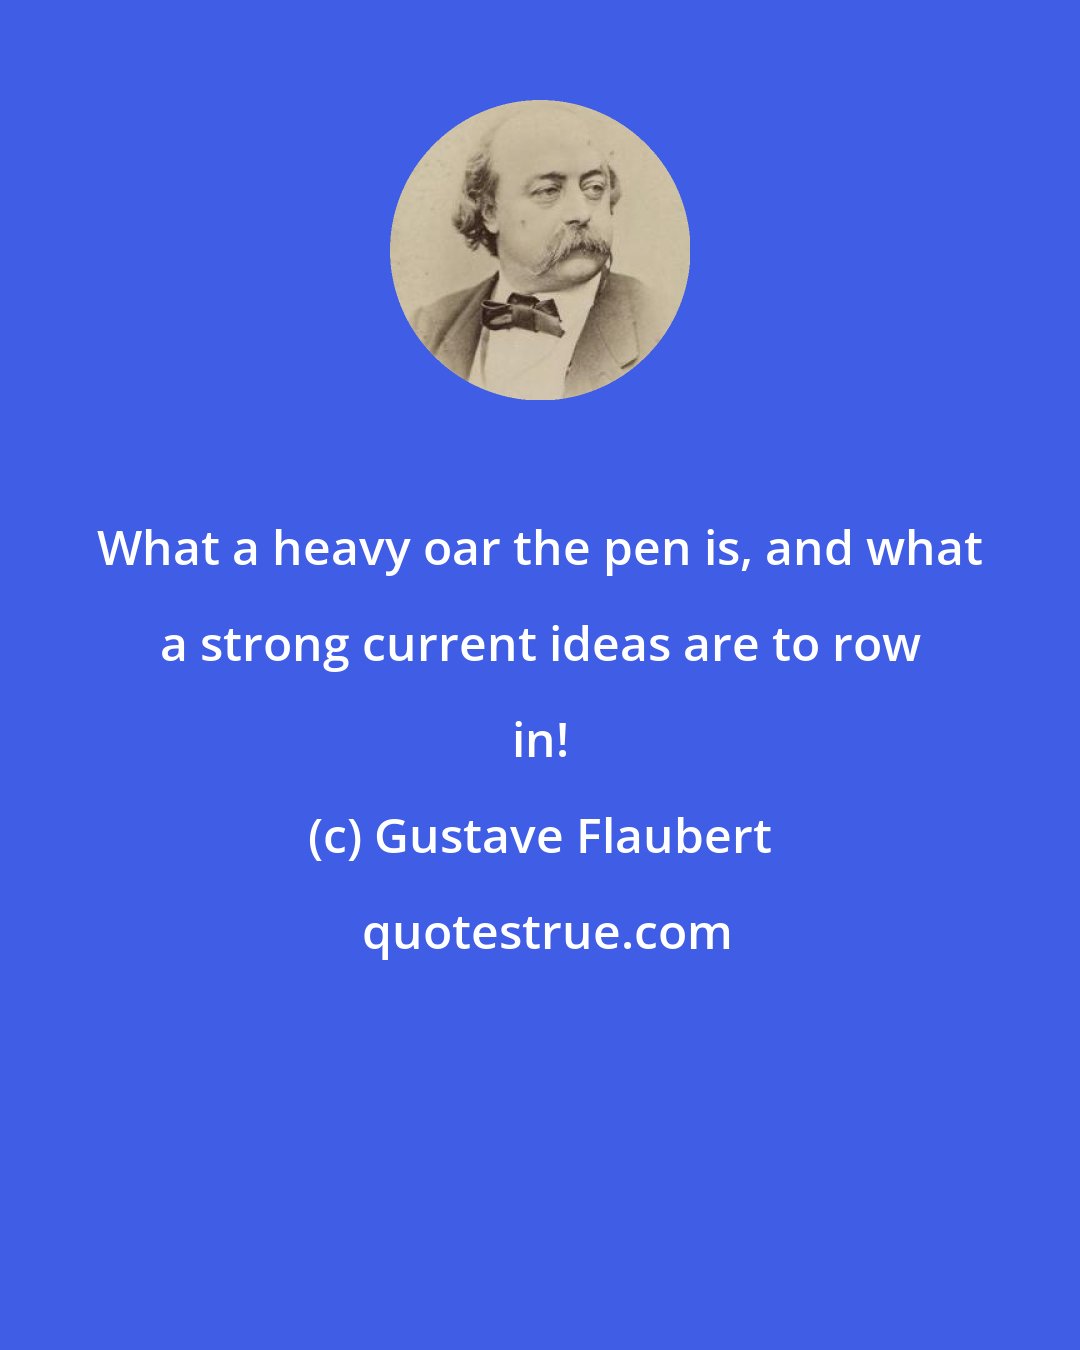 Gustave Flaubert: What a heavy oar the pen is, and what a strong current ideas are to row in!